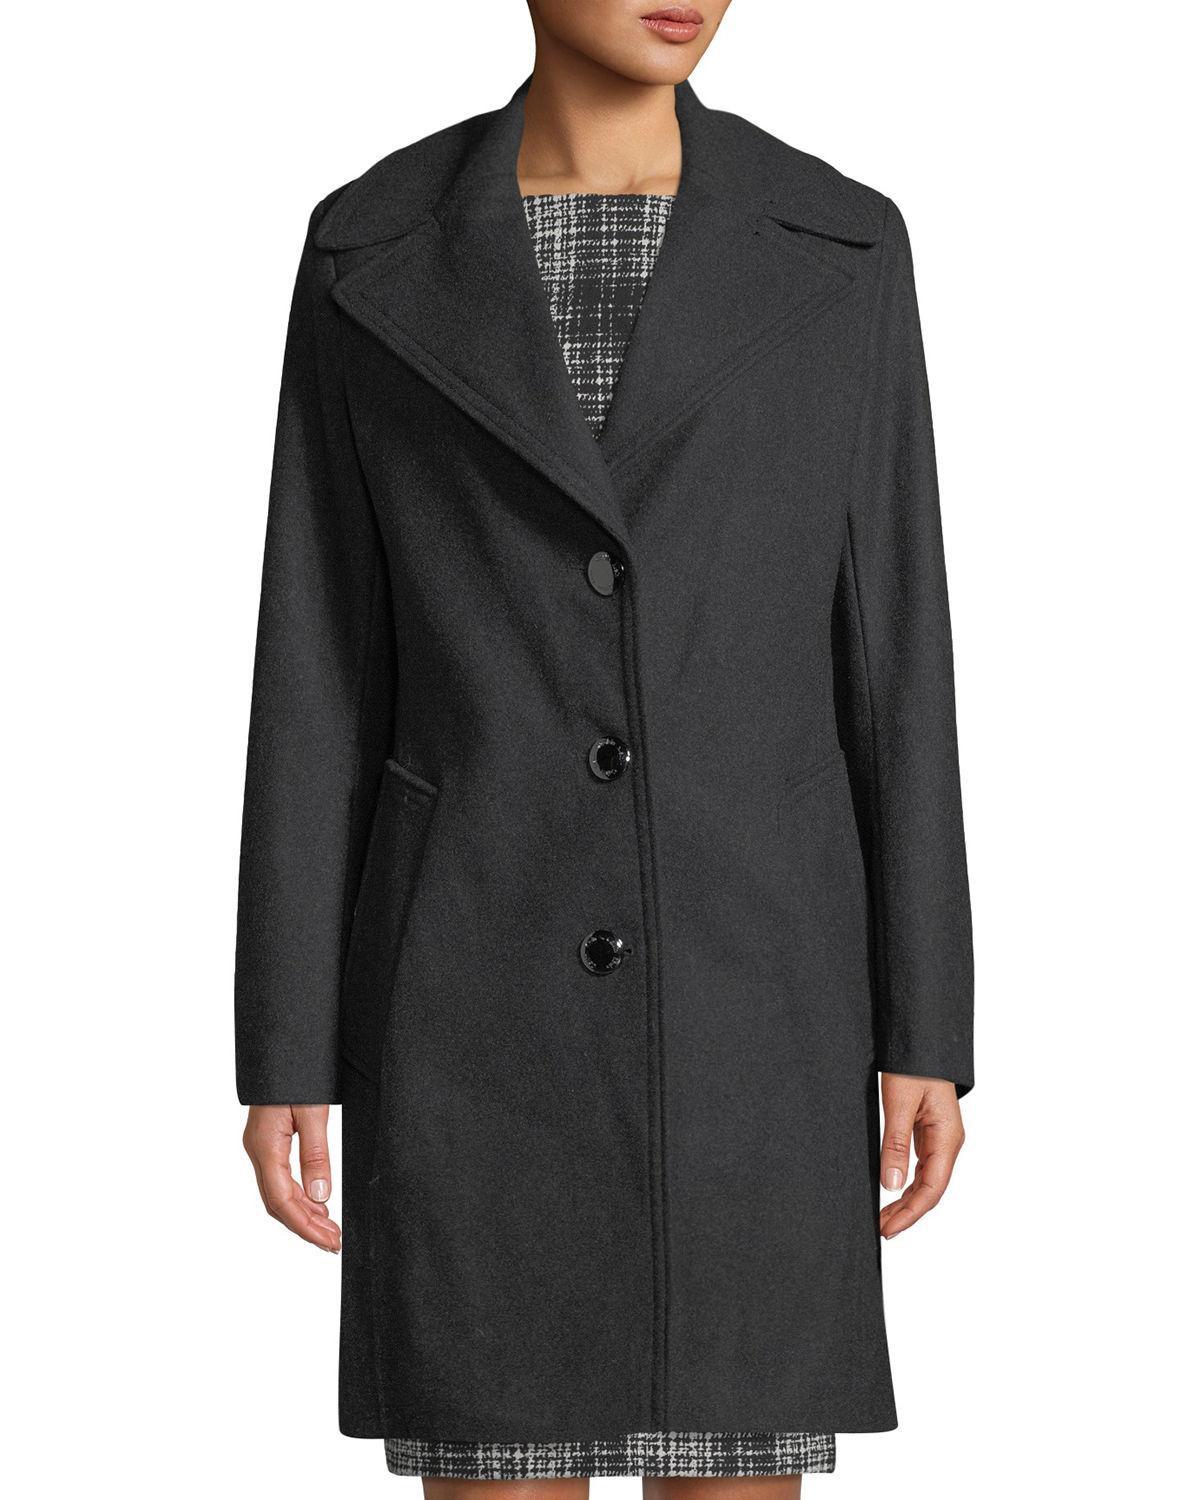 Calvin Klein Single-breasted Wool Reefer Coat in Charcoal (Gray) - Lyst